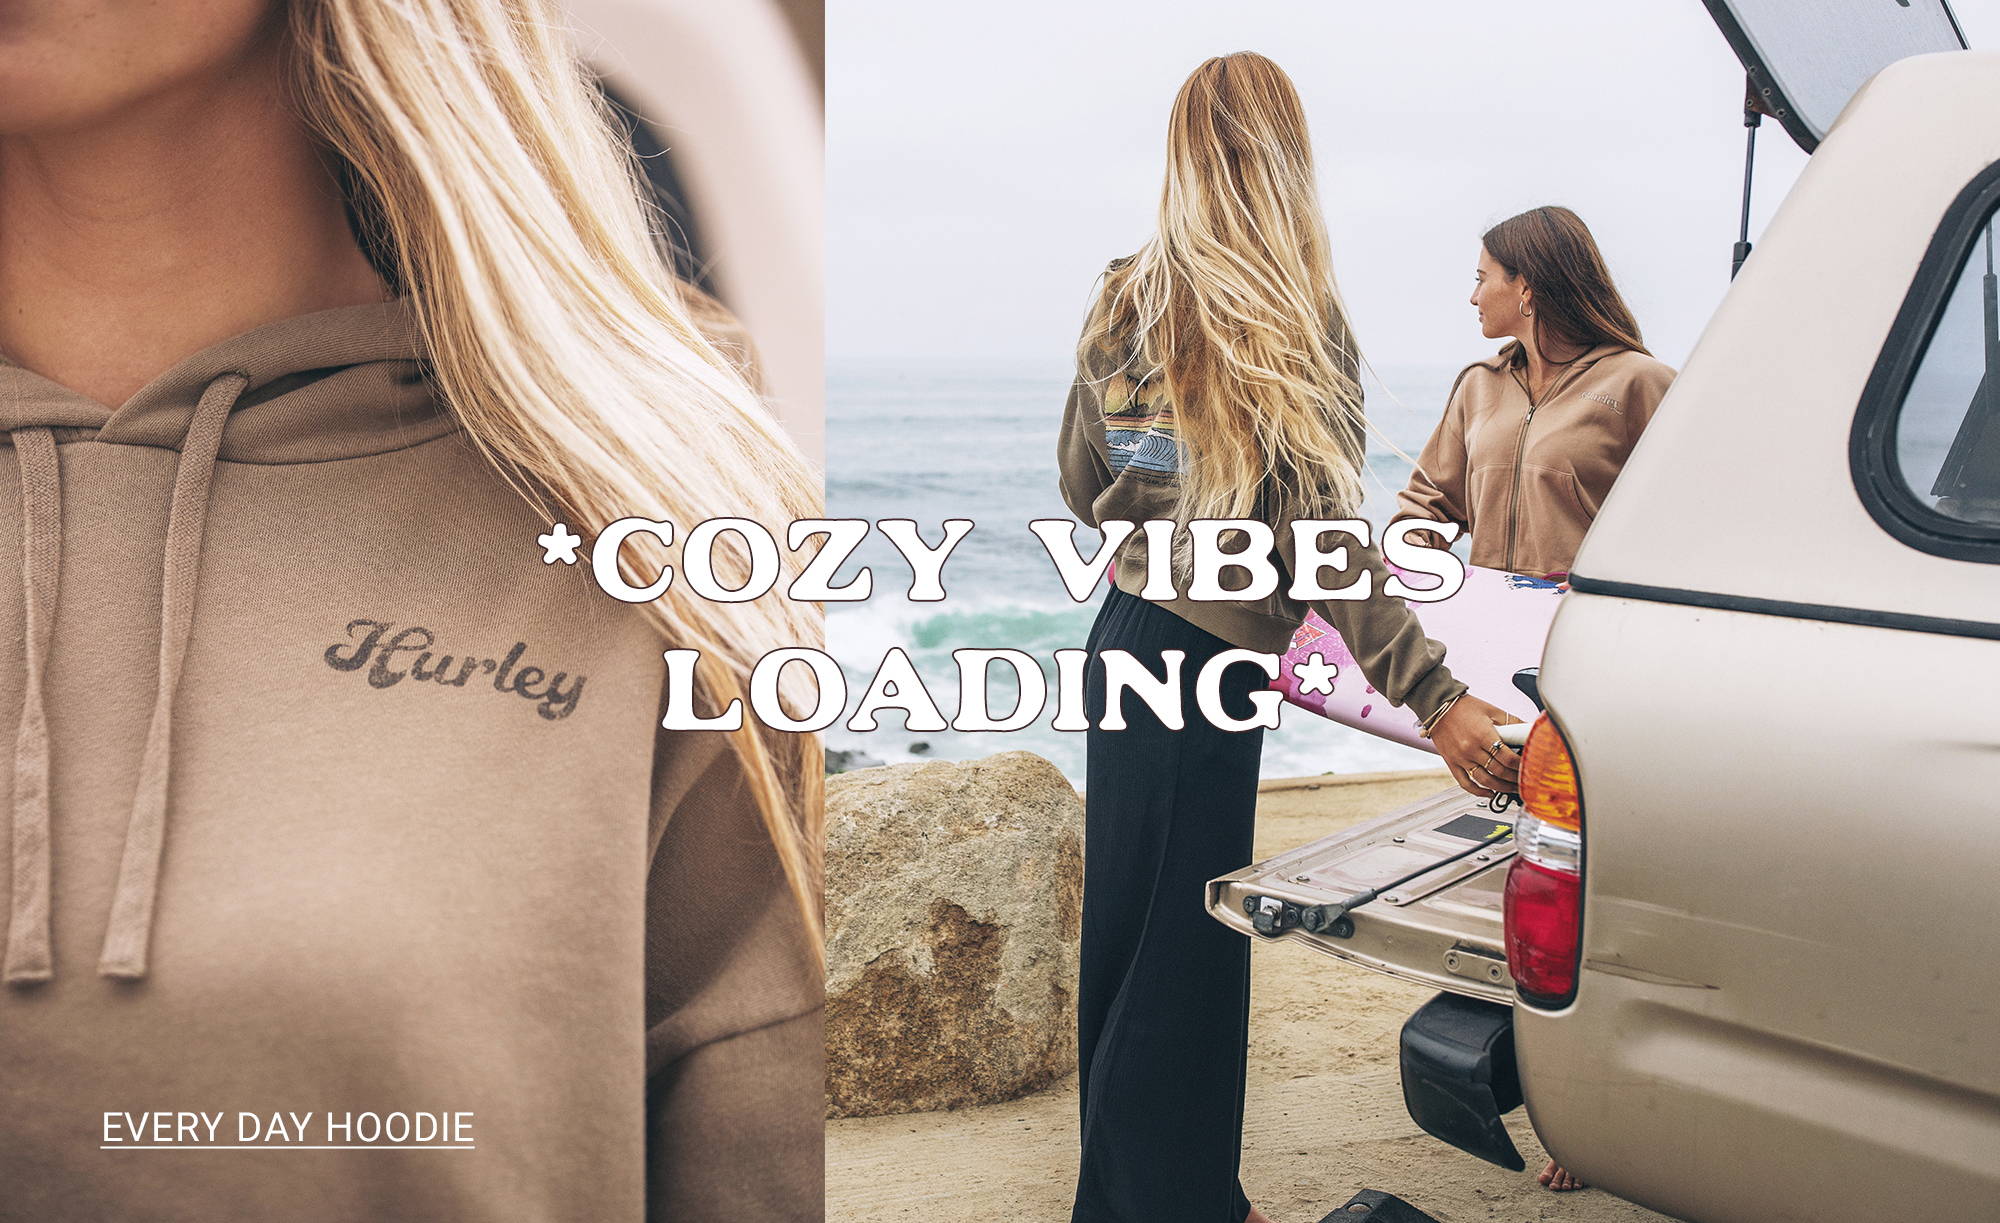 COZY VIBES LOADING EVERY DAY HOODIE